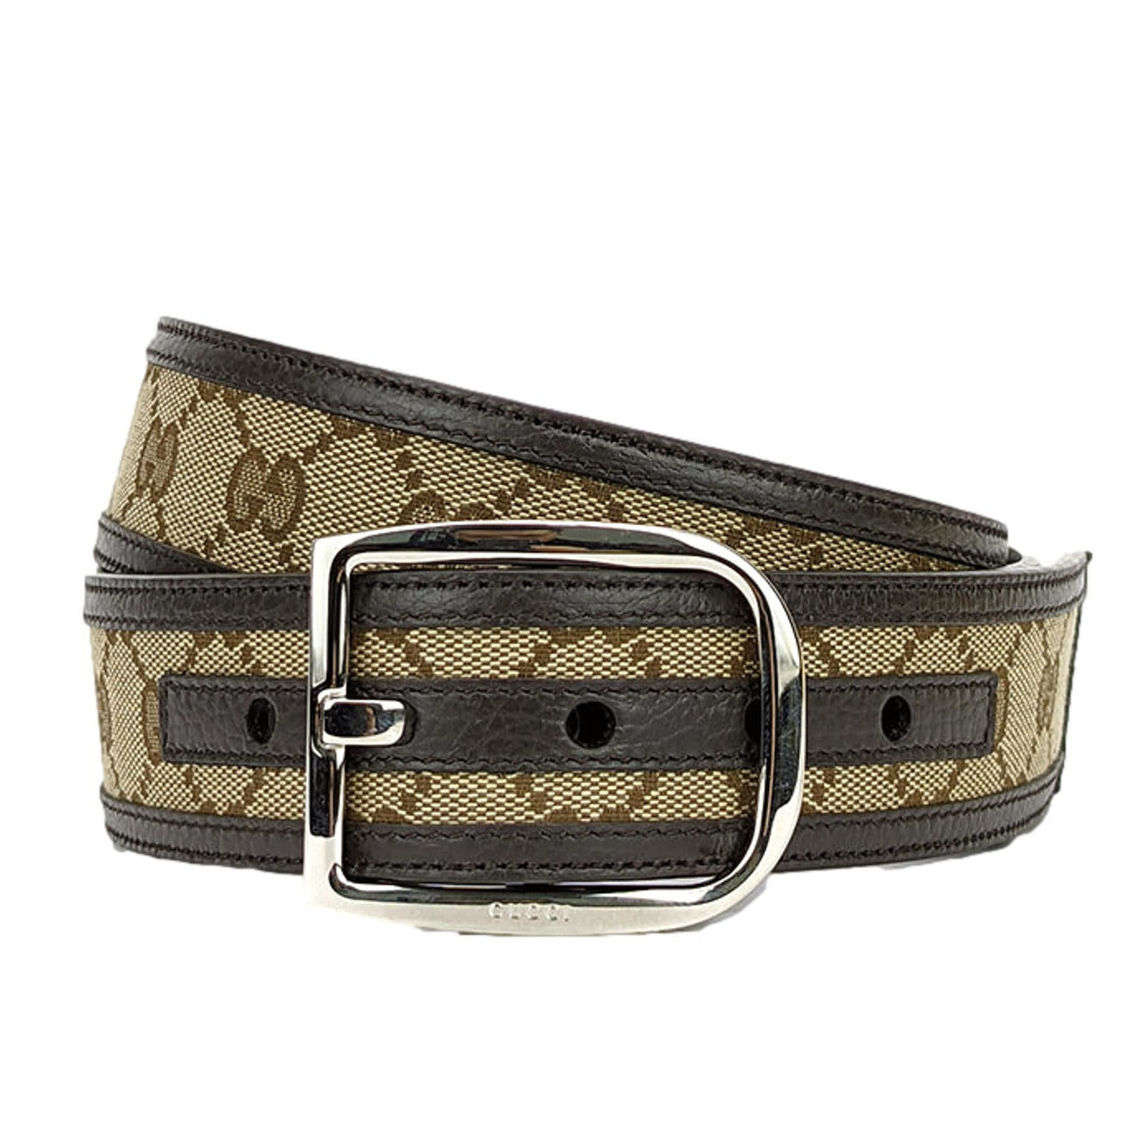 Gucci Mens Guccisssima Brown and Beige Canvas Leather Trim Belt Size 100/40 (New) - Image 2 of 5